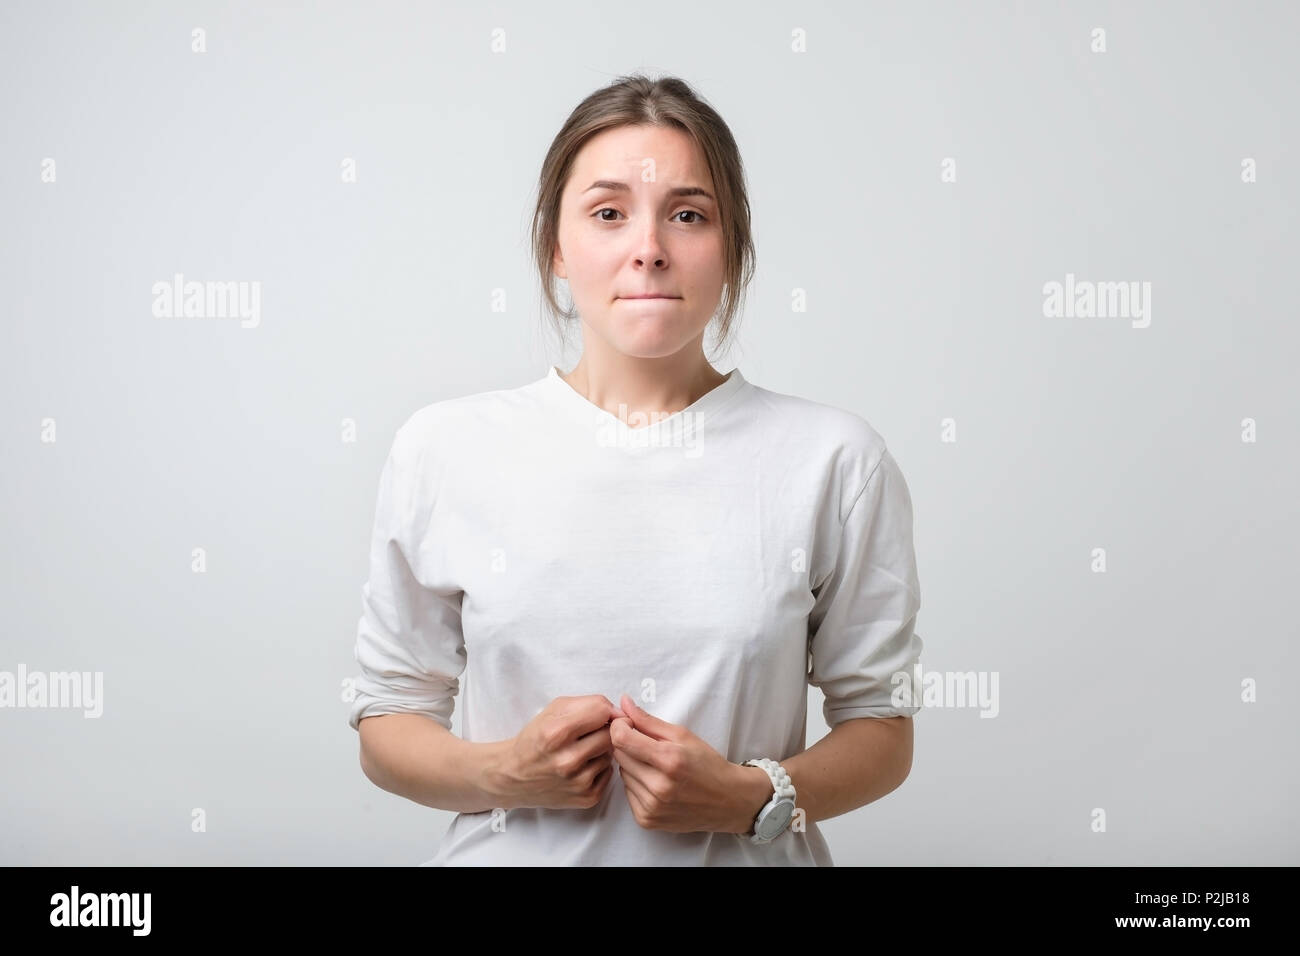 Portrait of beautiful girl in white t-shirt frowning her face in displeasure, keeping arms folded. Attractive young woman is angry and displeased Stock Photo